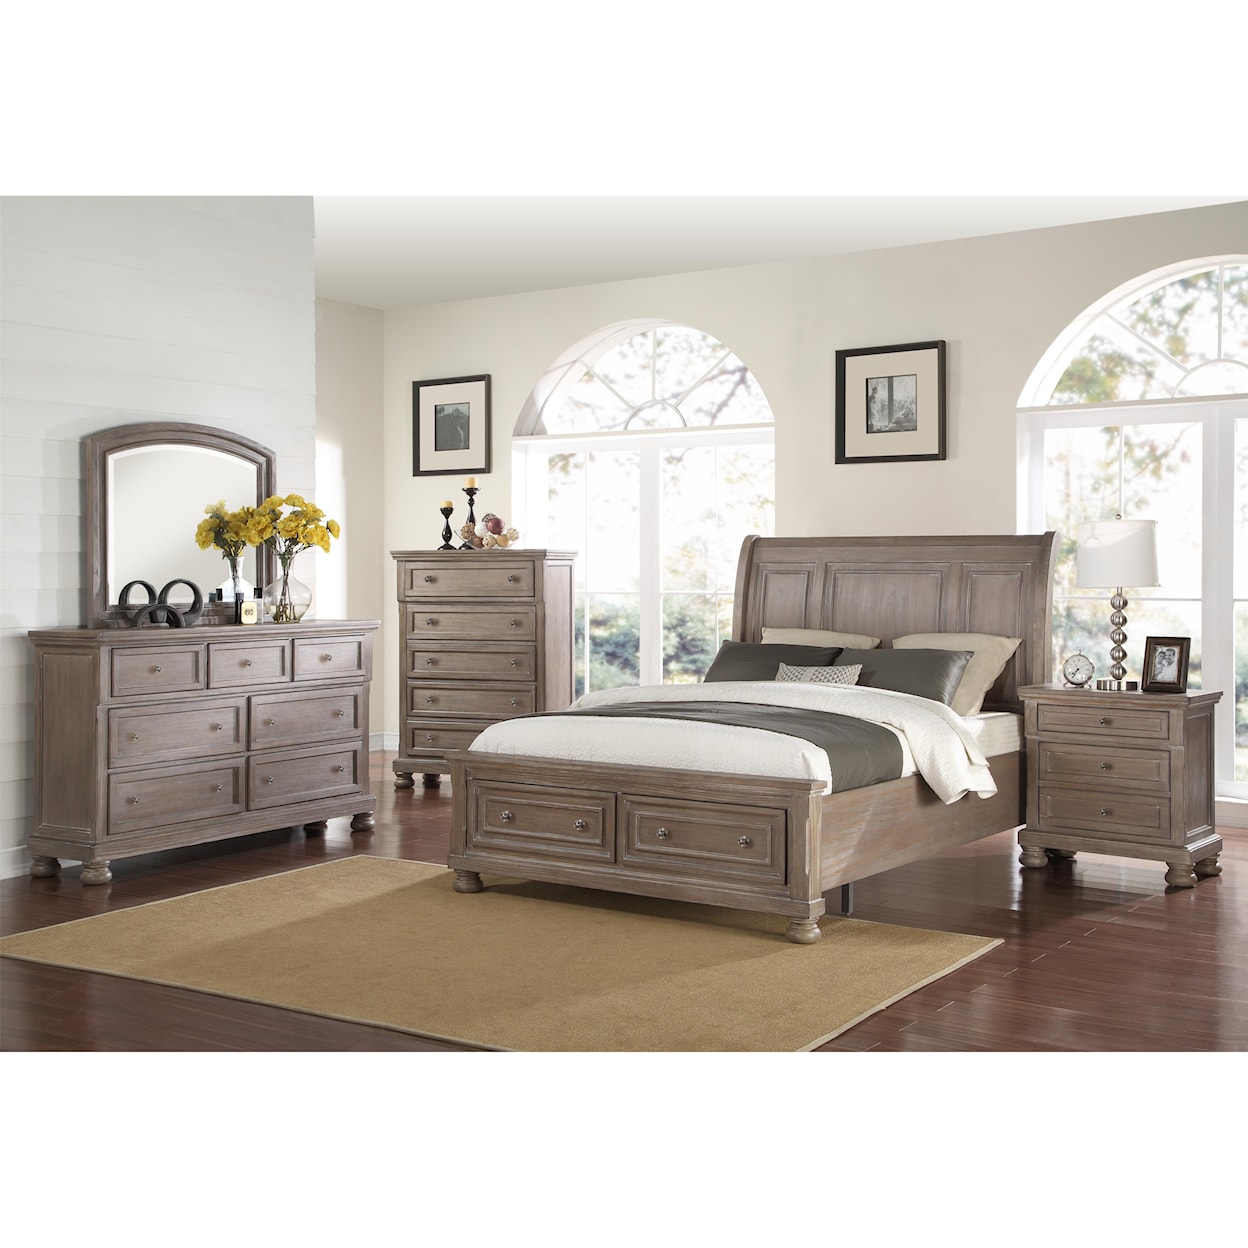 New Classic Furniture Allegra King Bedroom Group